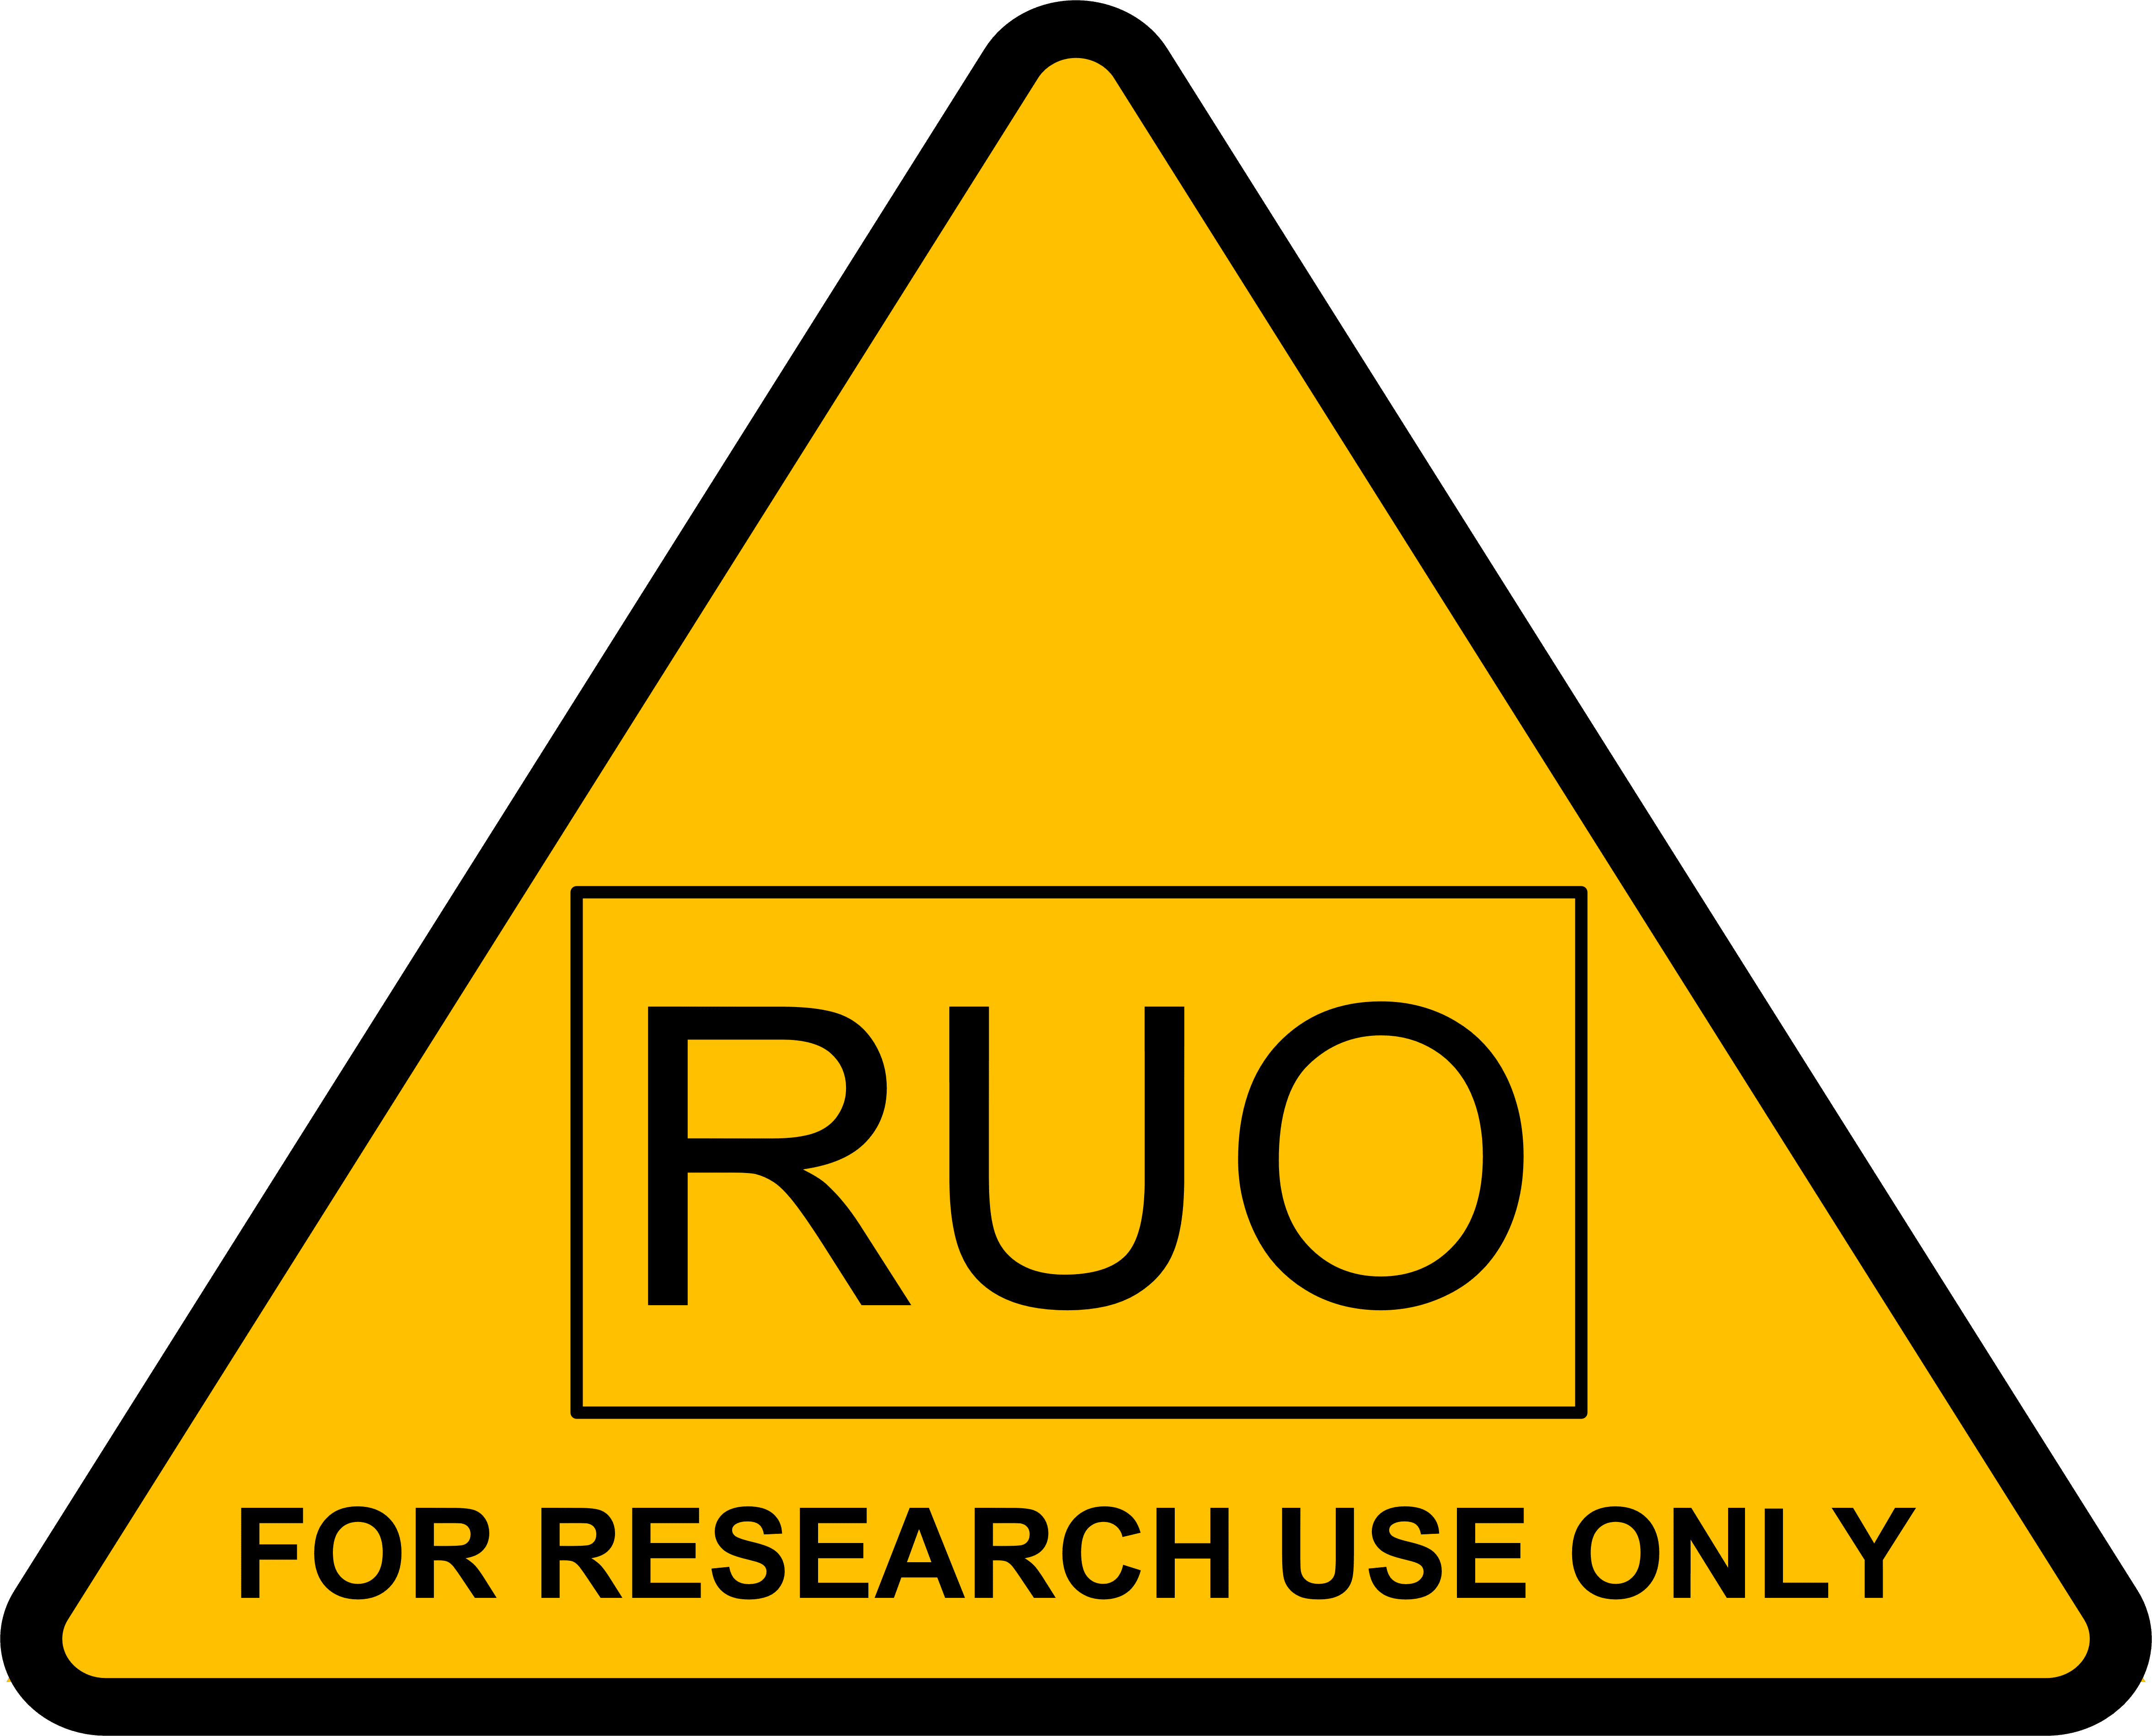 "For Research Use Only" (RUO) warning sign